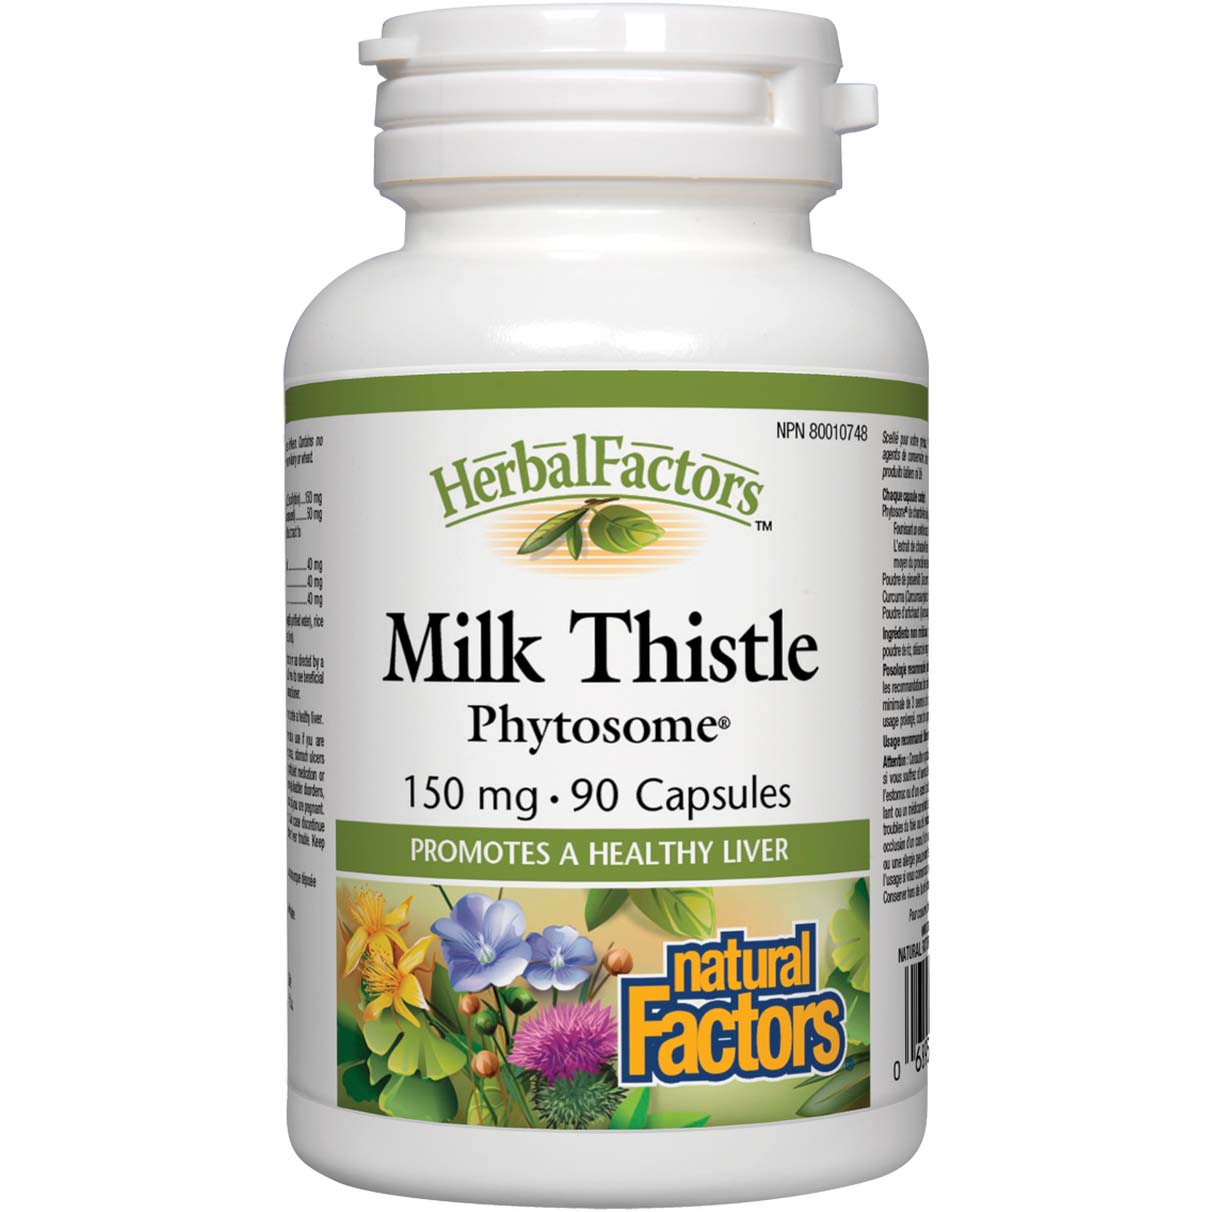 Natural Factors Milk Thistle Phytosome 90 Capsules 150 mg